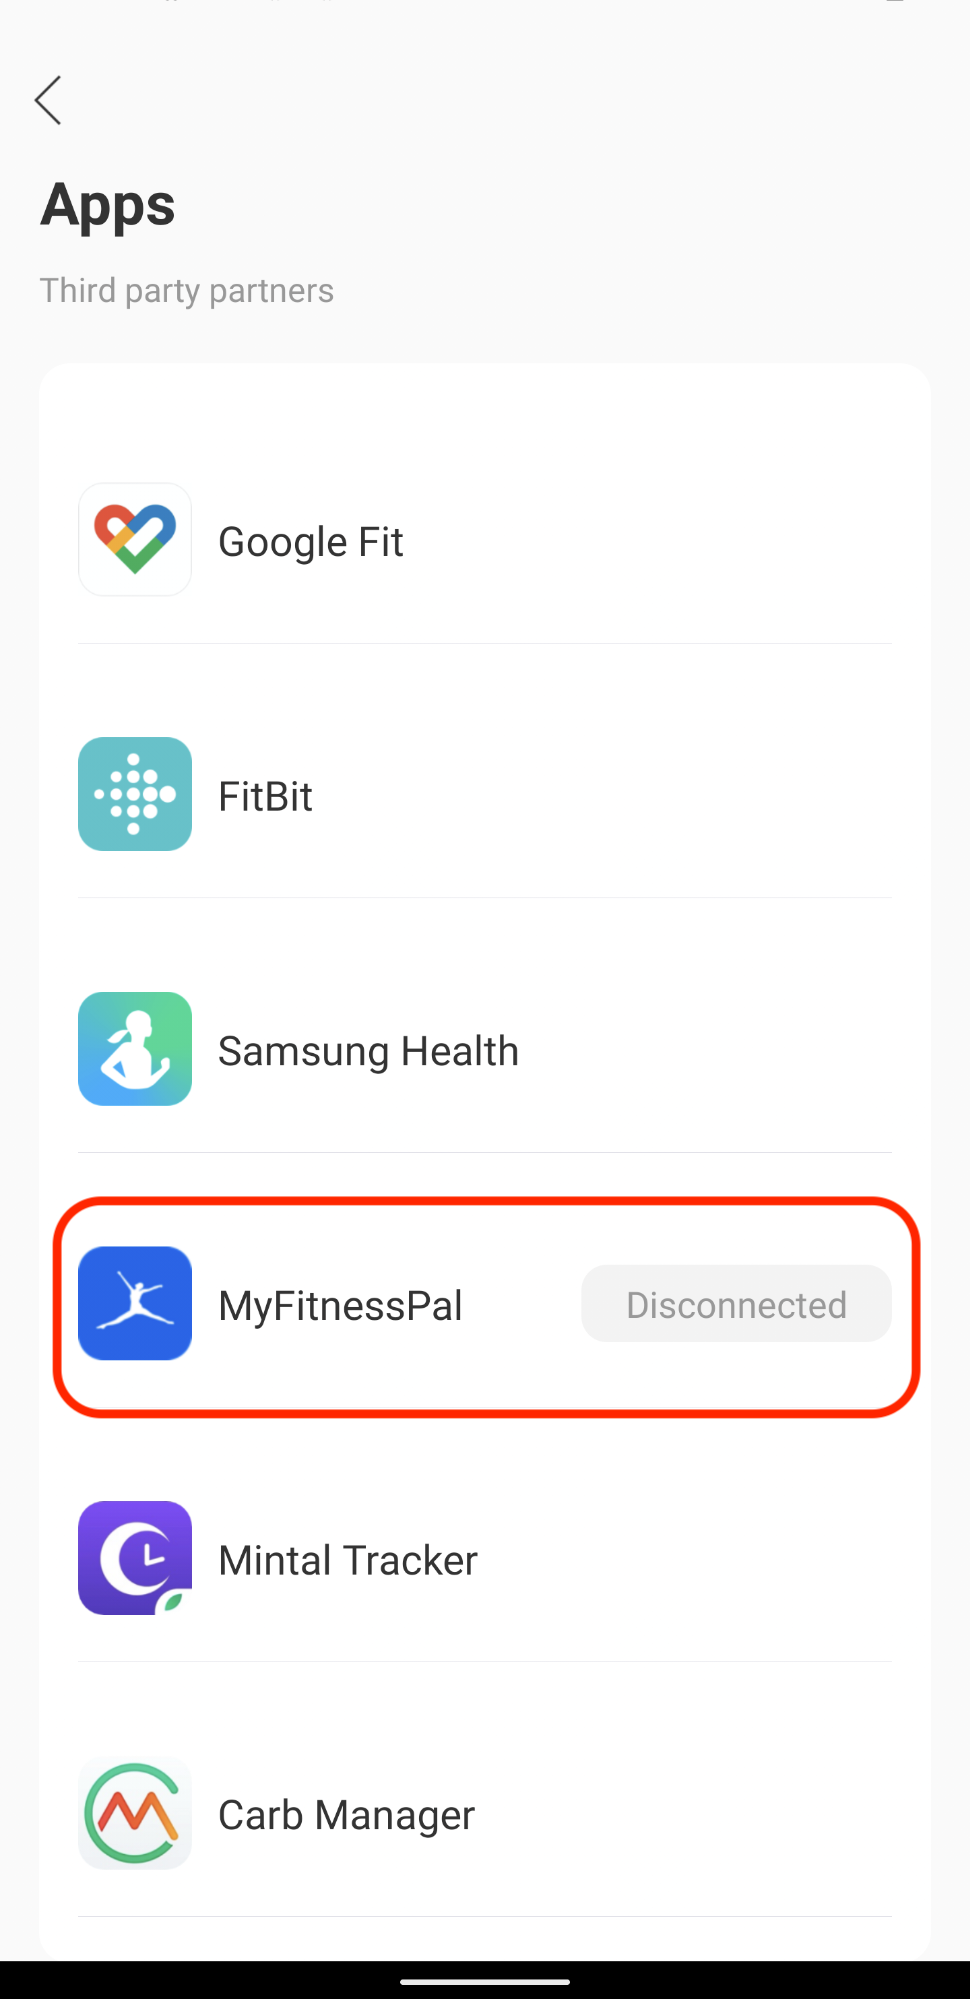 https://support.myfitnesspal.com/hc/article_attachments/4415924110349/android2.png